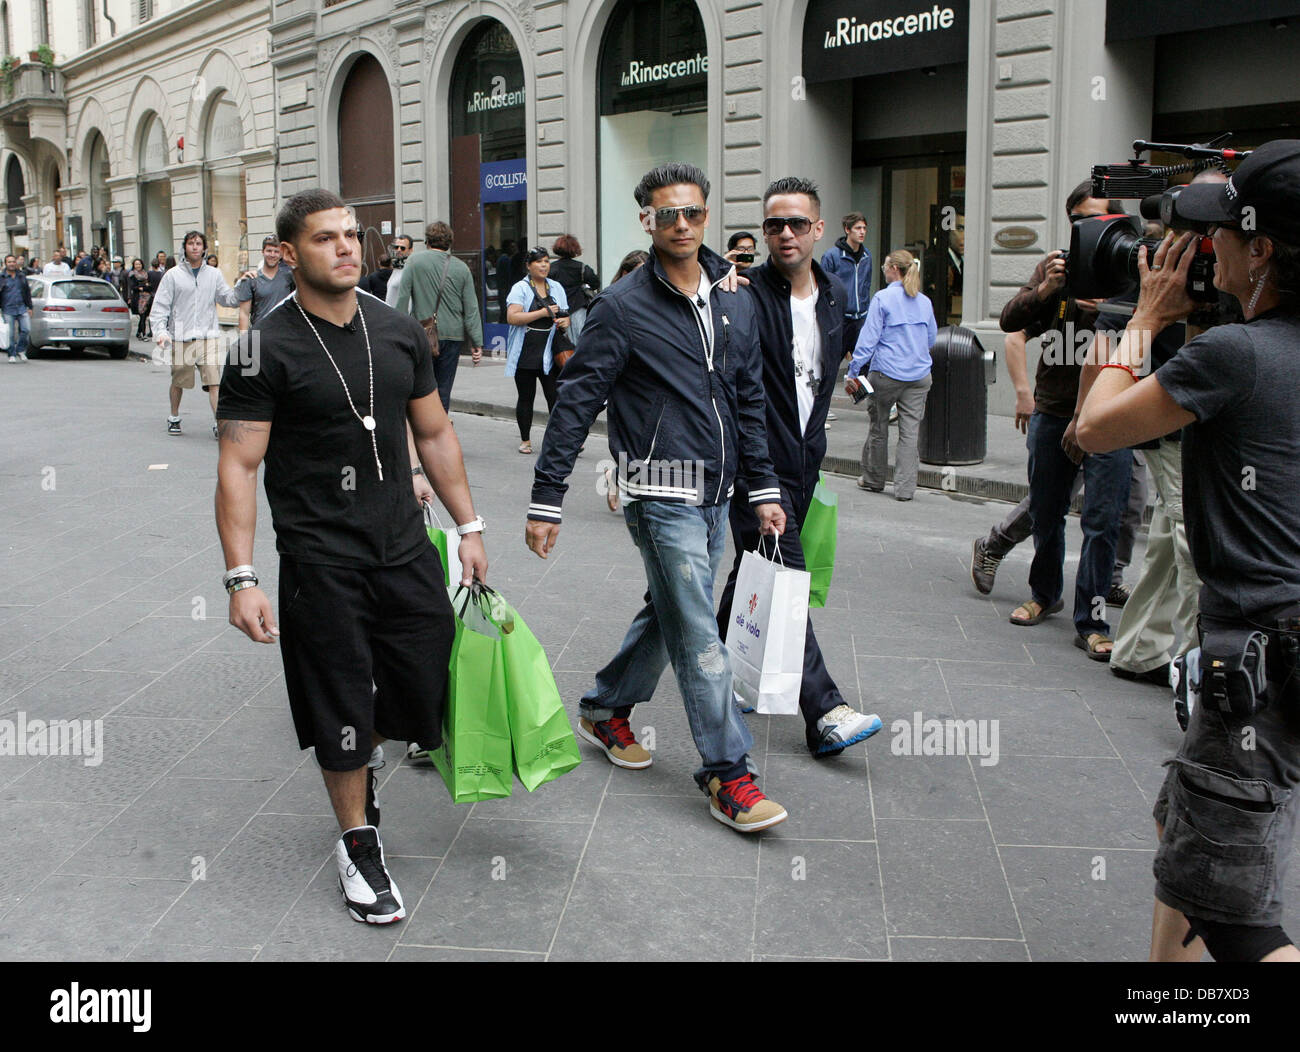 Ronnie Ortiz-Magro, DJ Pauly D and Mike 'The Situation' Sorrentino  shopping in Florence while filming the reality show 'Jersey Shore' Florence, Italy - 15.05.11 Stock Photo